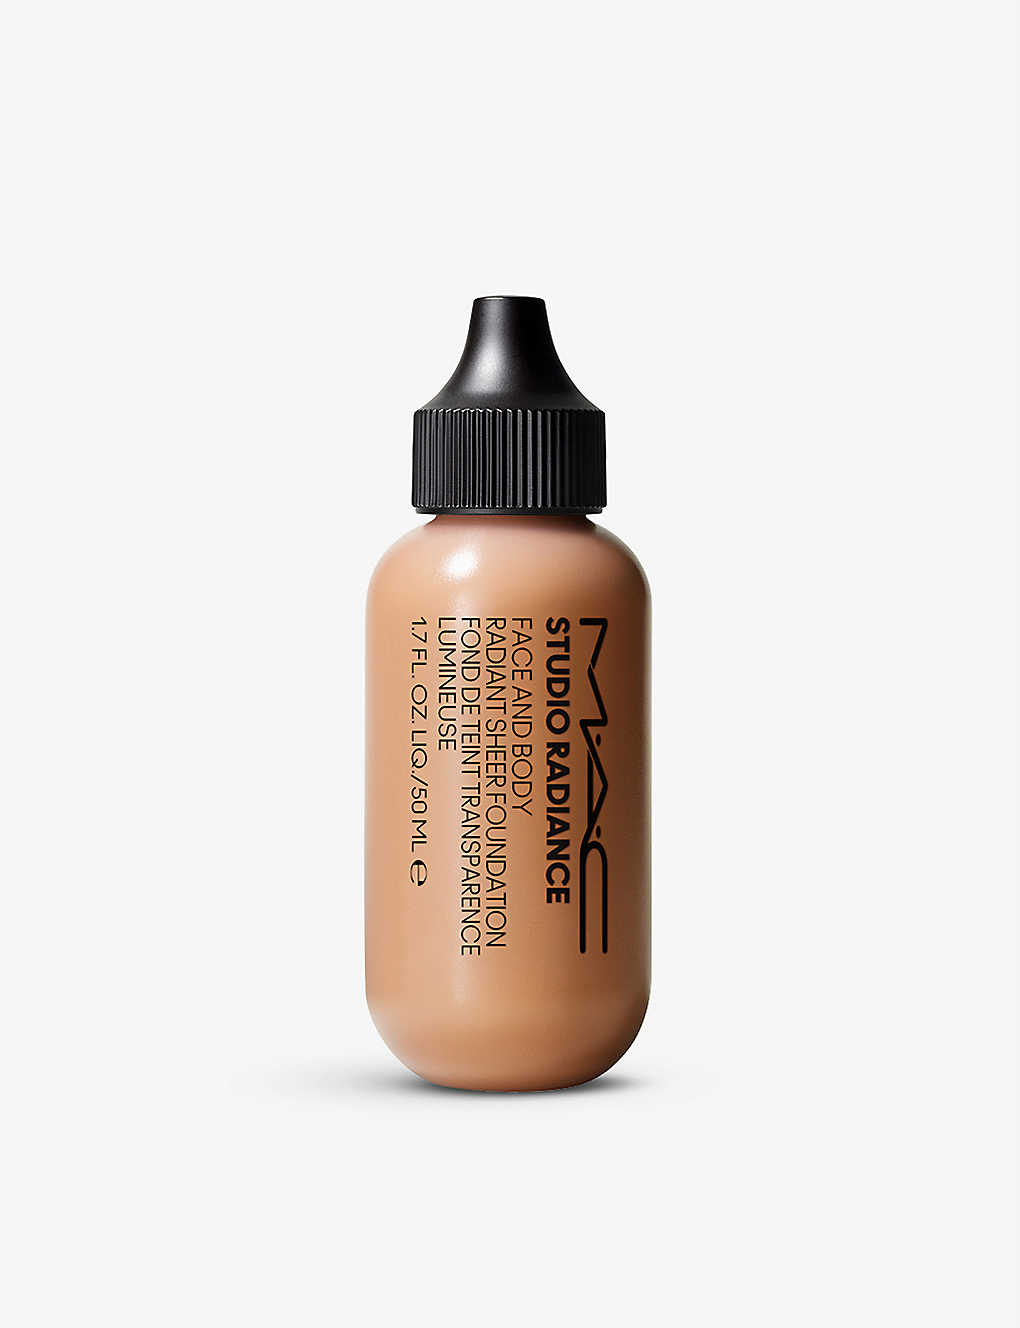 Mac Studio Radiance Face And Body Radiant Sheer Foundation 50ml In N4